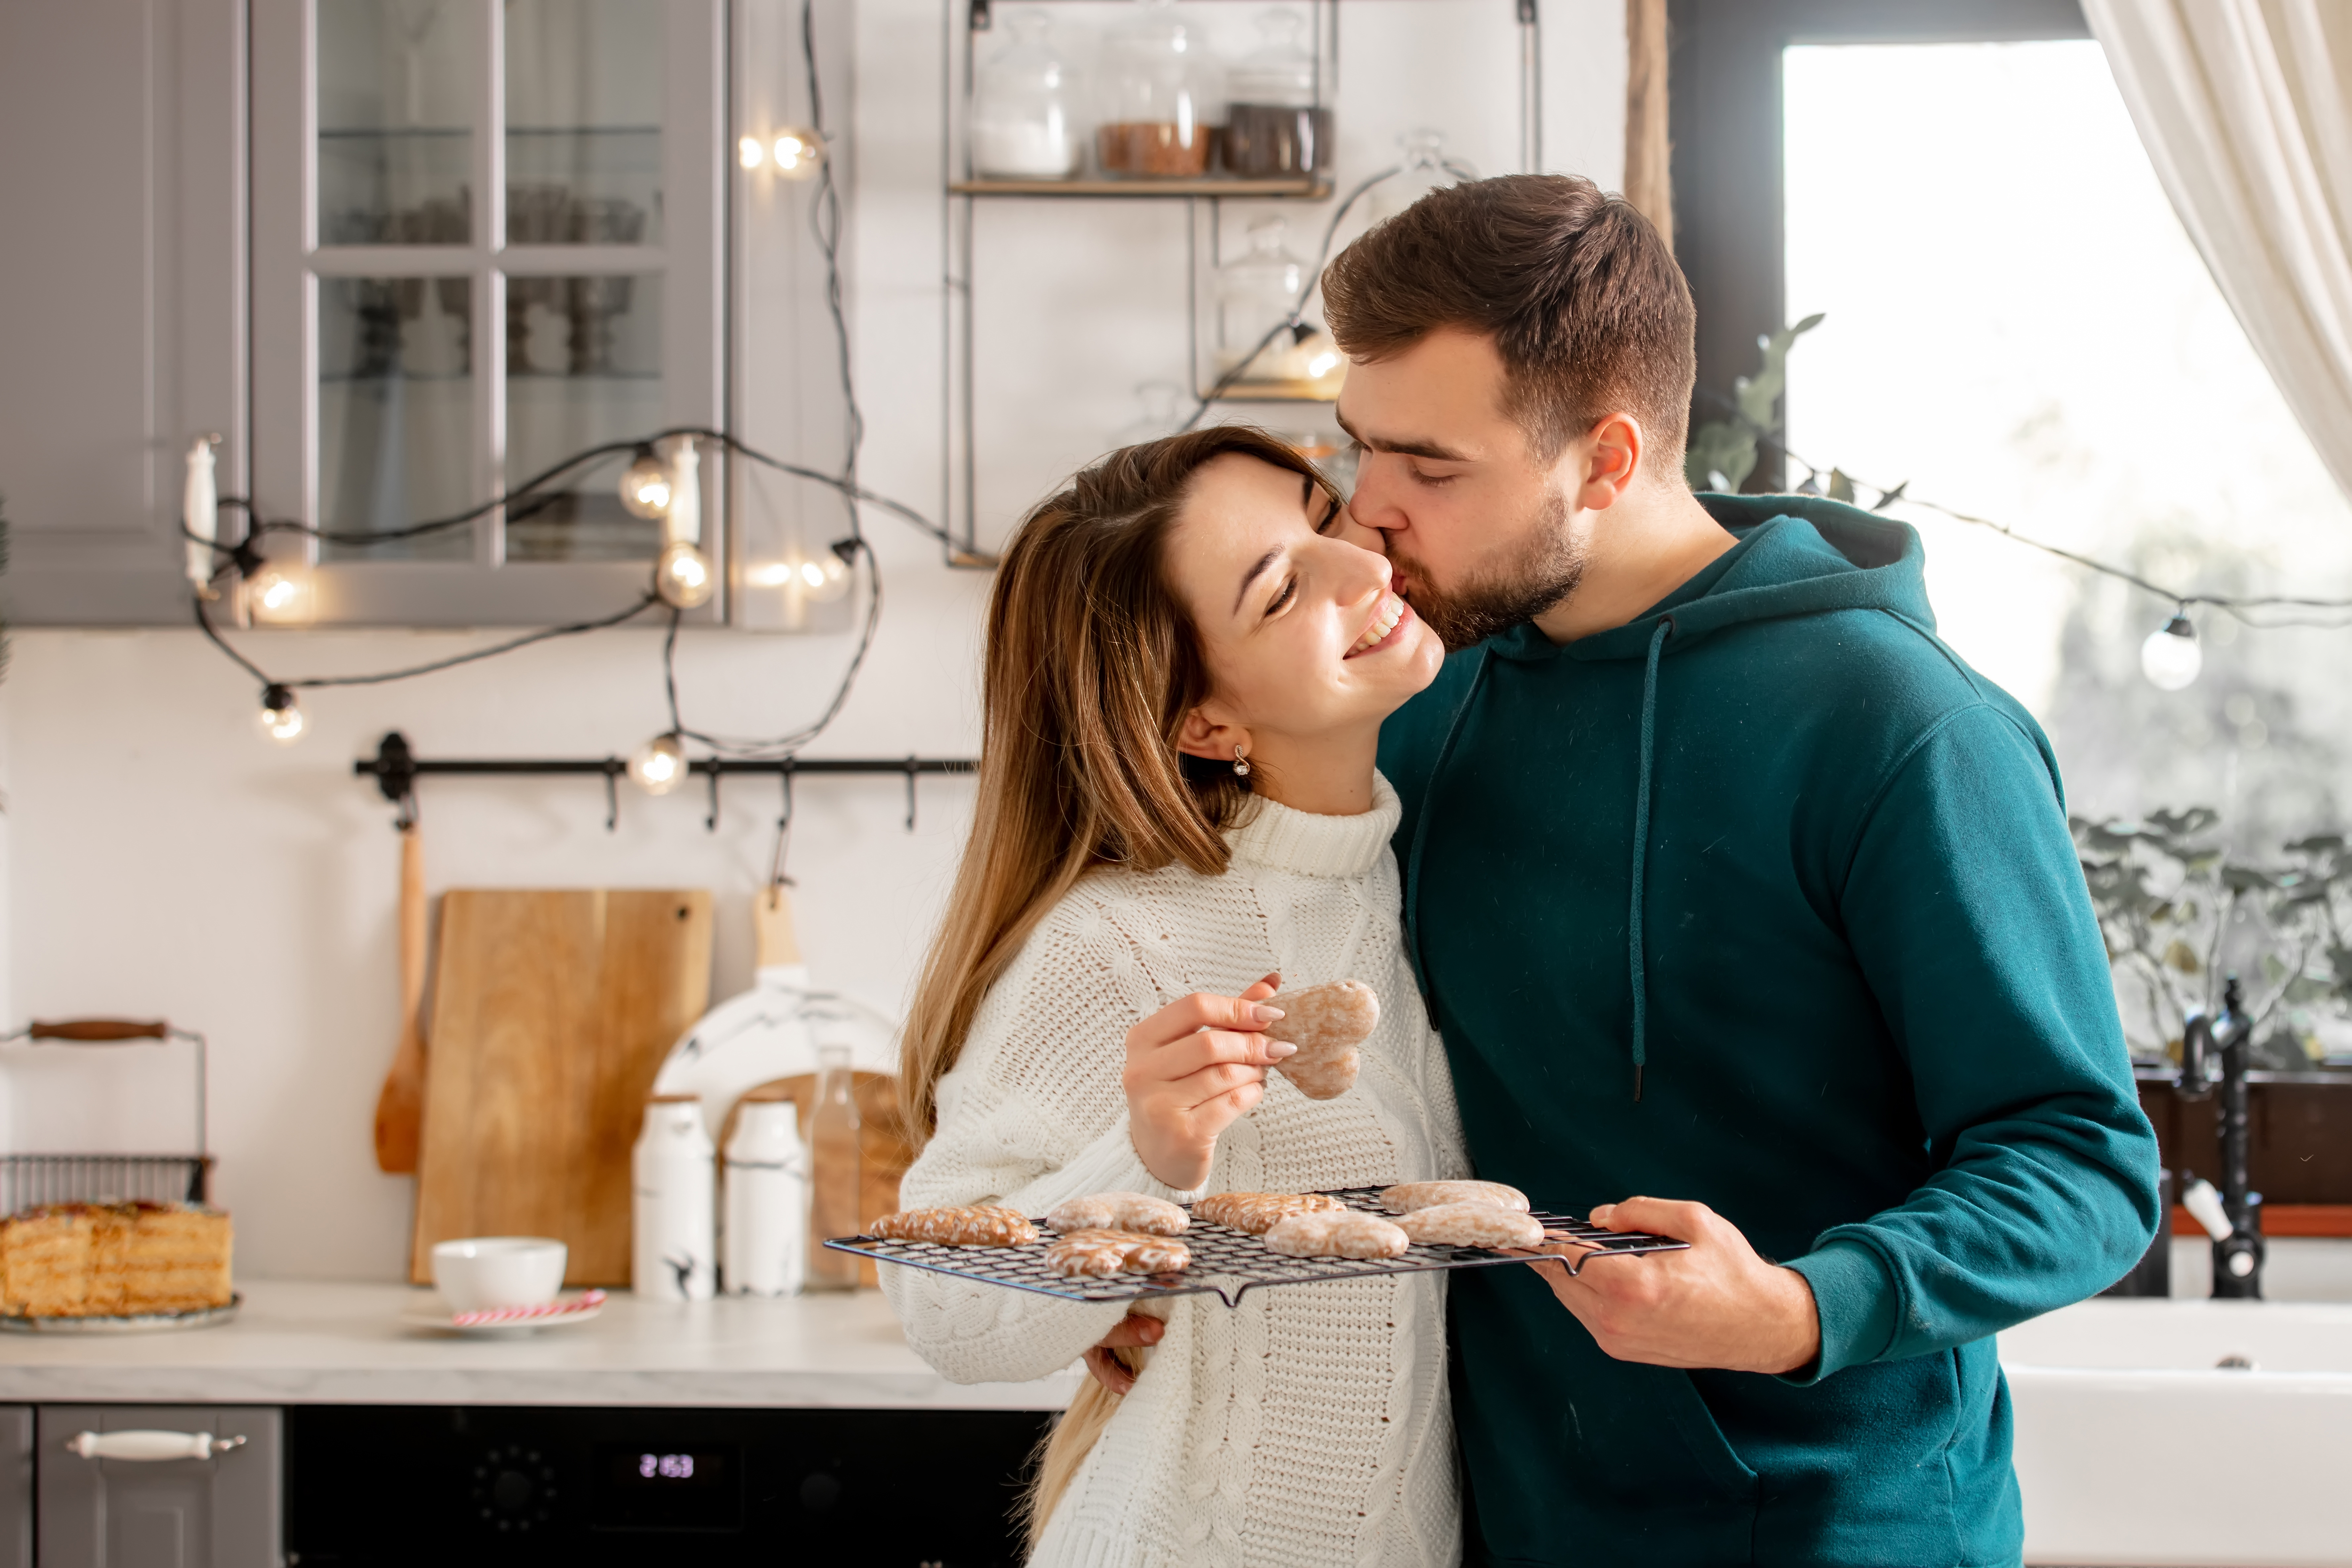 A husband kissing his wife while baking cookies at home | Source: Shutterstock